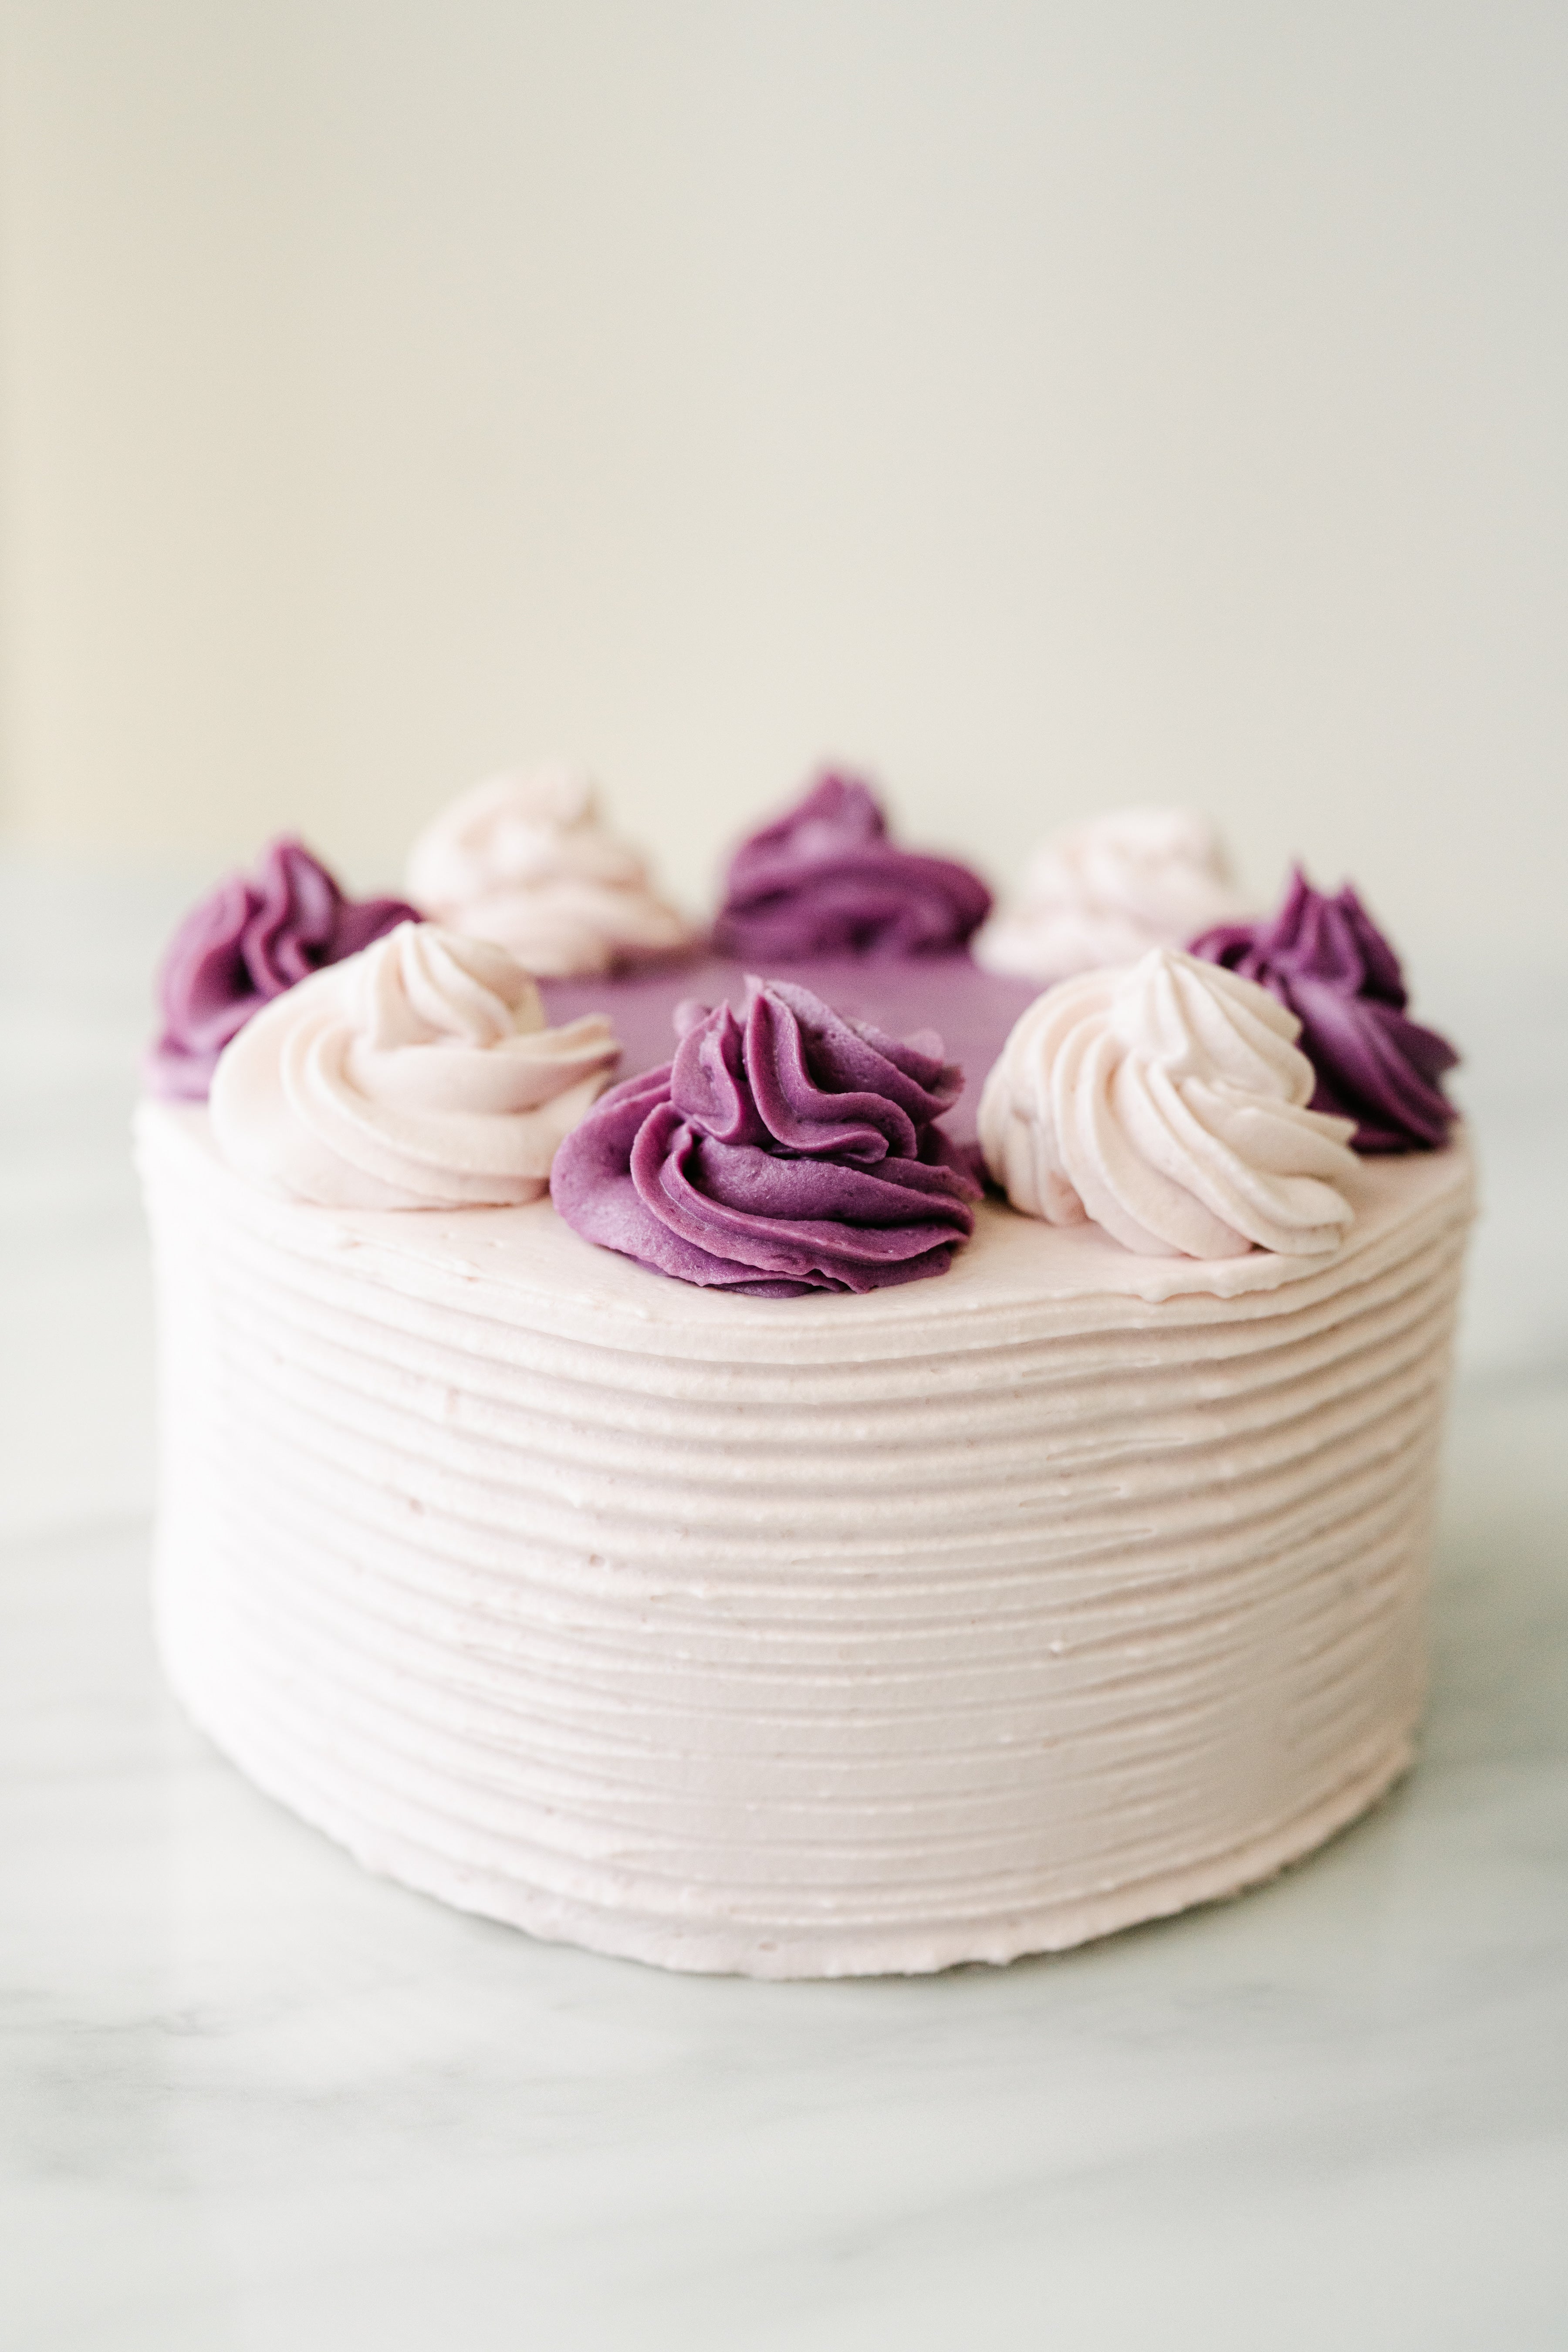 nothing prettier than butterflies and shades of purple 🦋💜 #cake #cak... |  TikTok